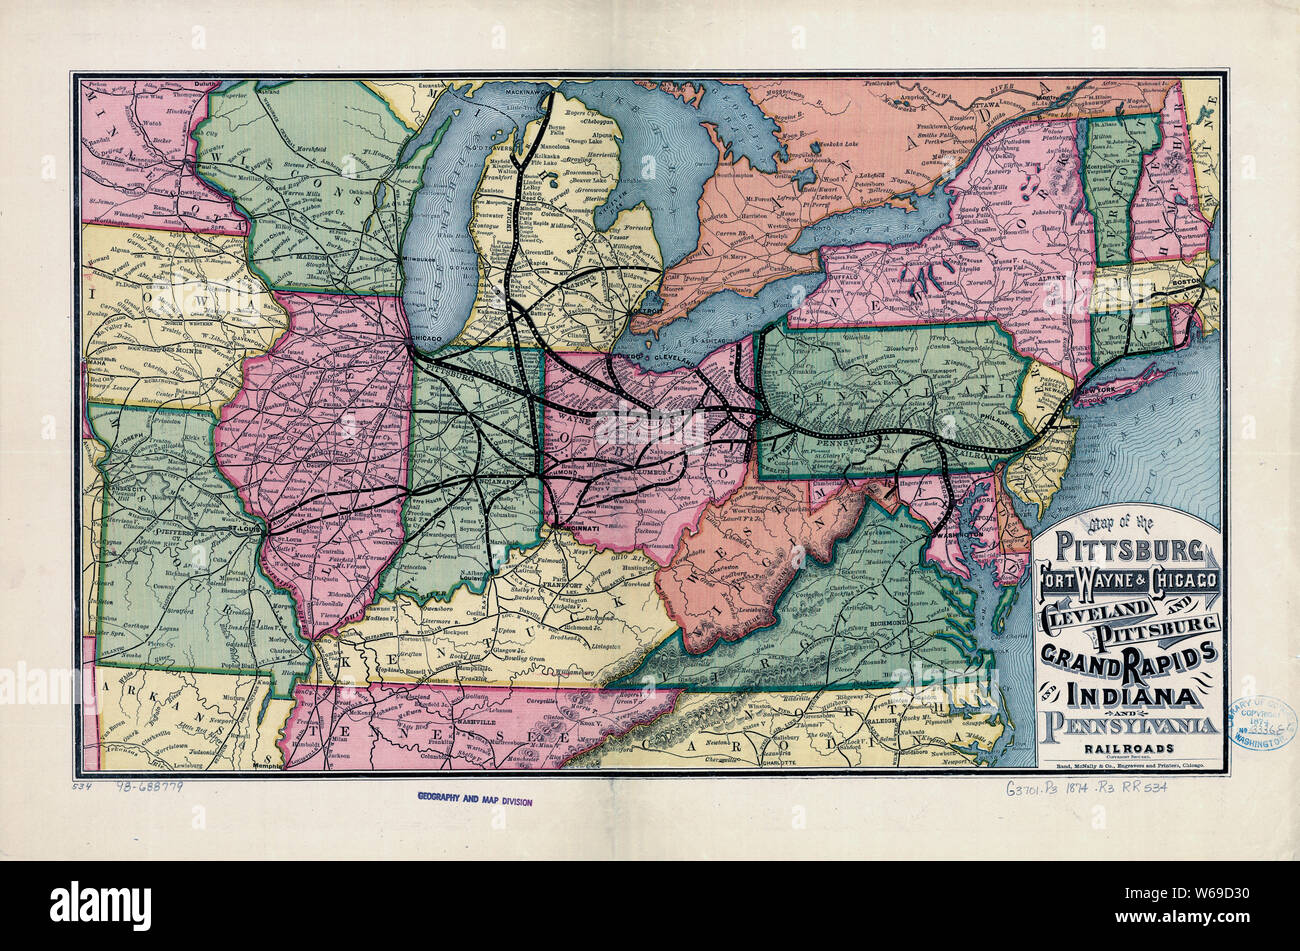 0361 Railroad Maps Map of the Pittsburg sic Fort Wayne Chicago Cleveland and Pittsburg sic Grand Rapids and Indiana and Pennsylvania railroads Rebuild and Repair Stock Photo